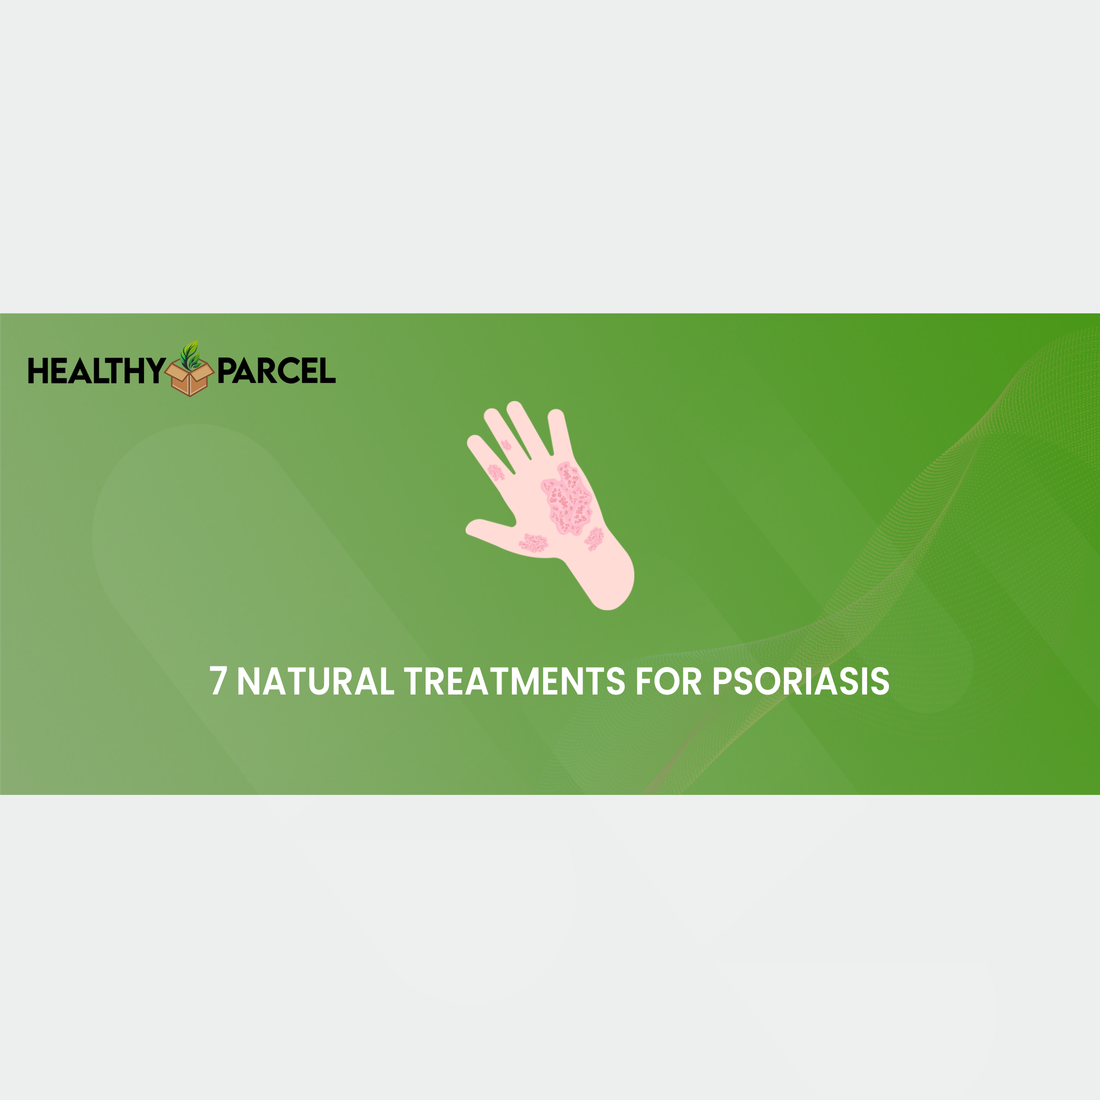 7 Natural Treatments for Psoriasis